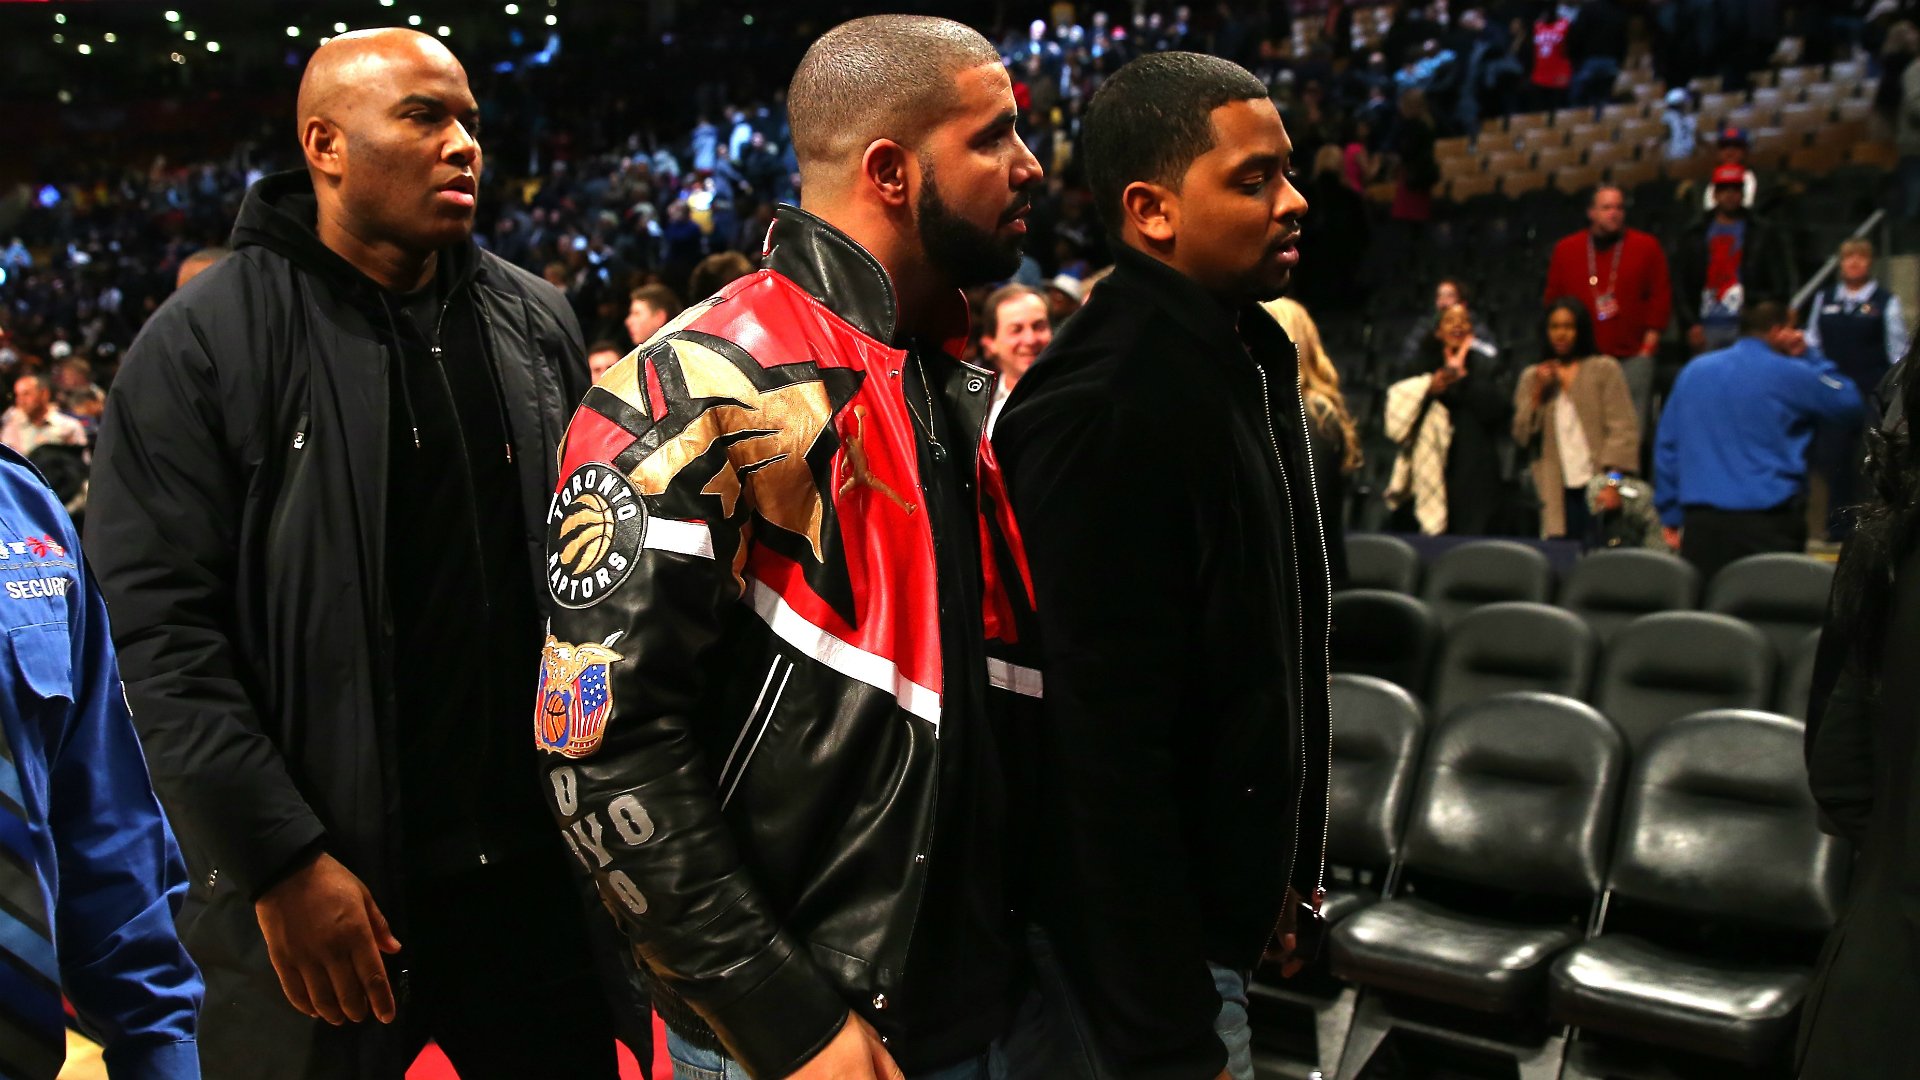 Meek Mill Blocked Drake From Having Any After-Parties In Philly